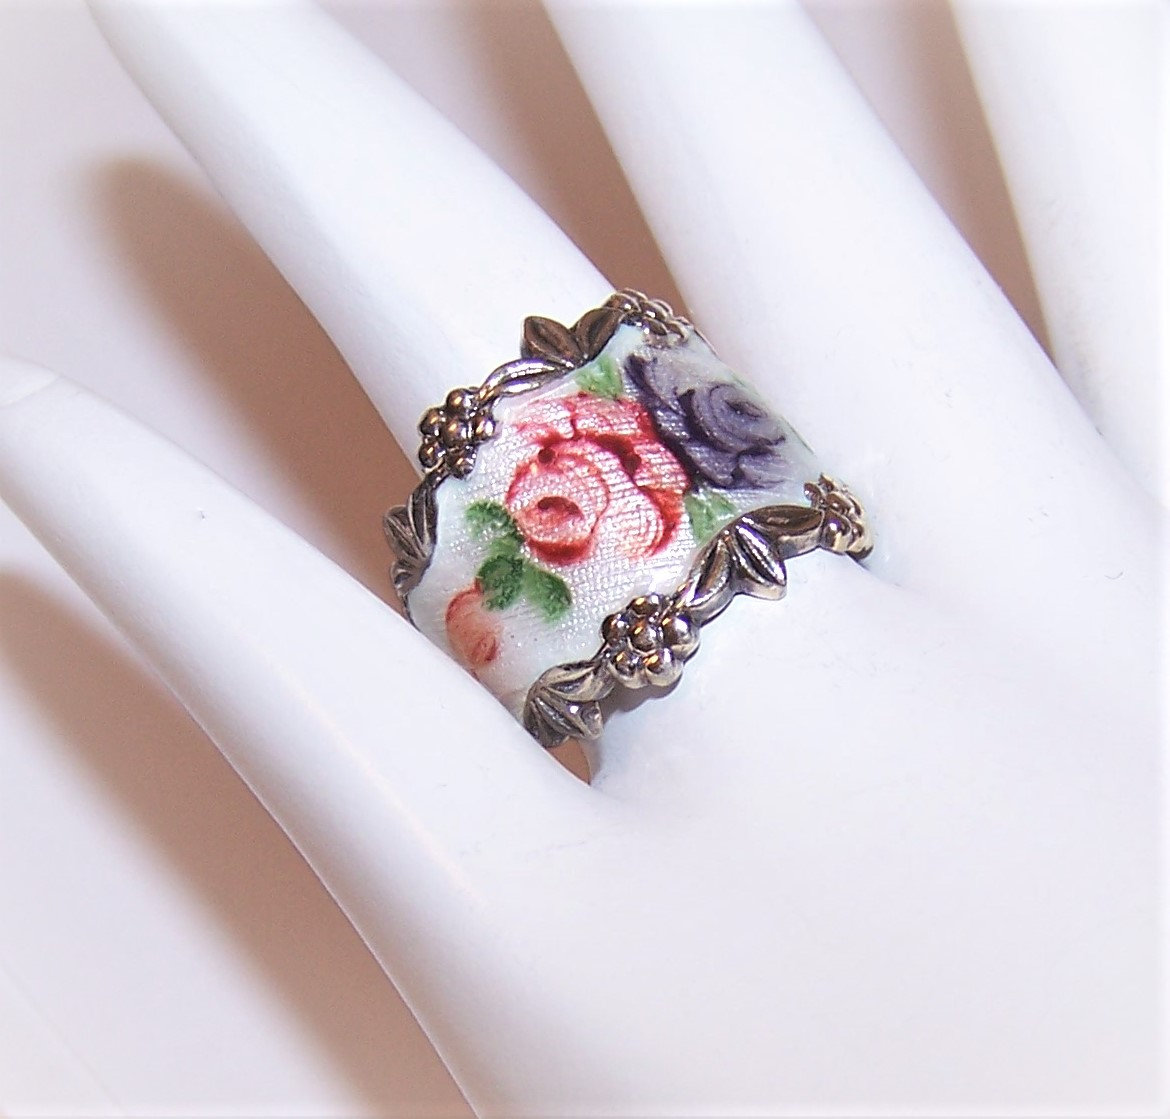 The latest addition to my #etsy shop: Vintage Mid Century Vargas Sterling Silver Enamel Cigar Band Ring - Pink & Purples Flowers with Leaves | Wedding Band | Painted Florals etsy.me/3657pqC #vargasring #silverenamel #cigarbandring #enamelring #floralring